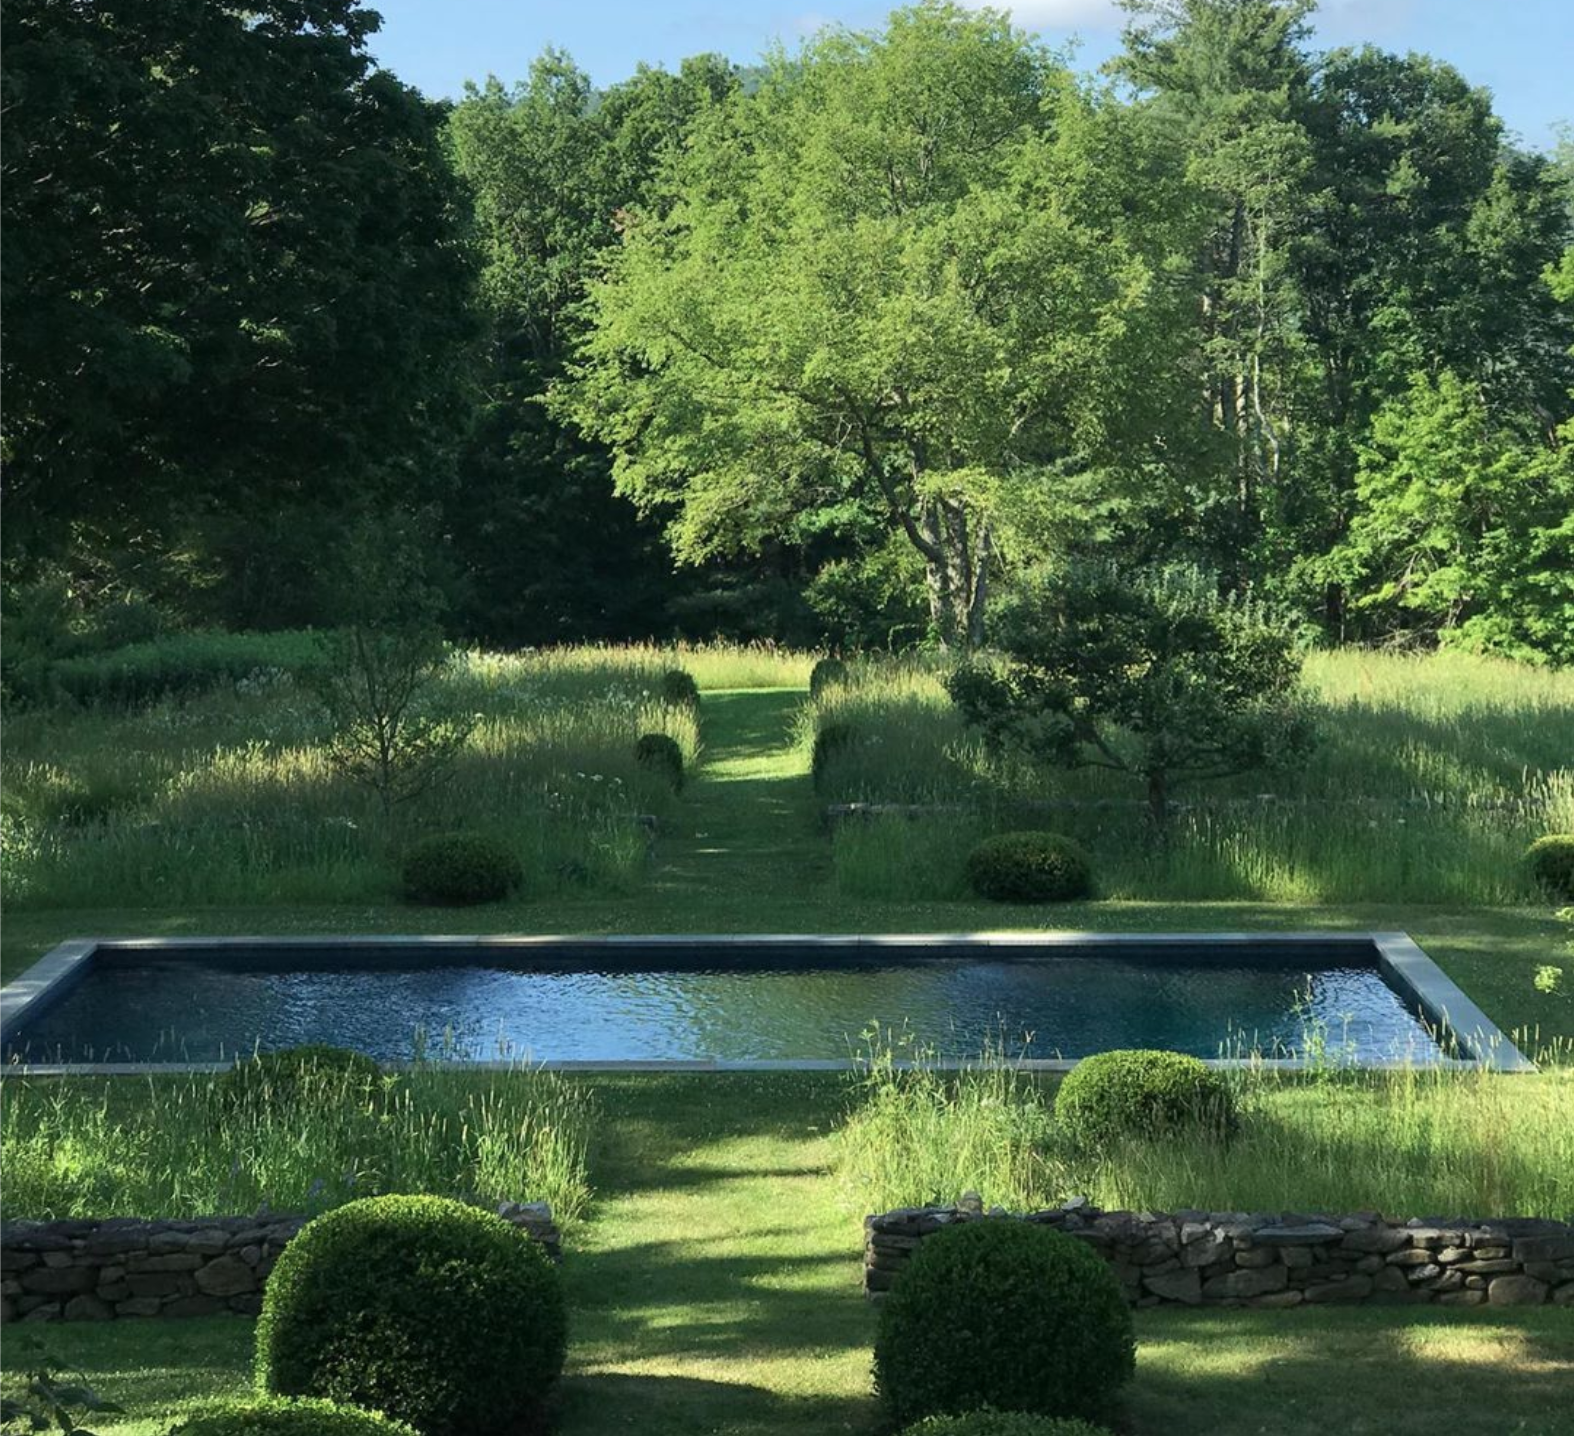 Landscape design by Miranda Brooks. Wild plantings of oxeye daisies, daylilies, and meadow flowers envelop a lazing pool.